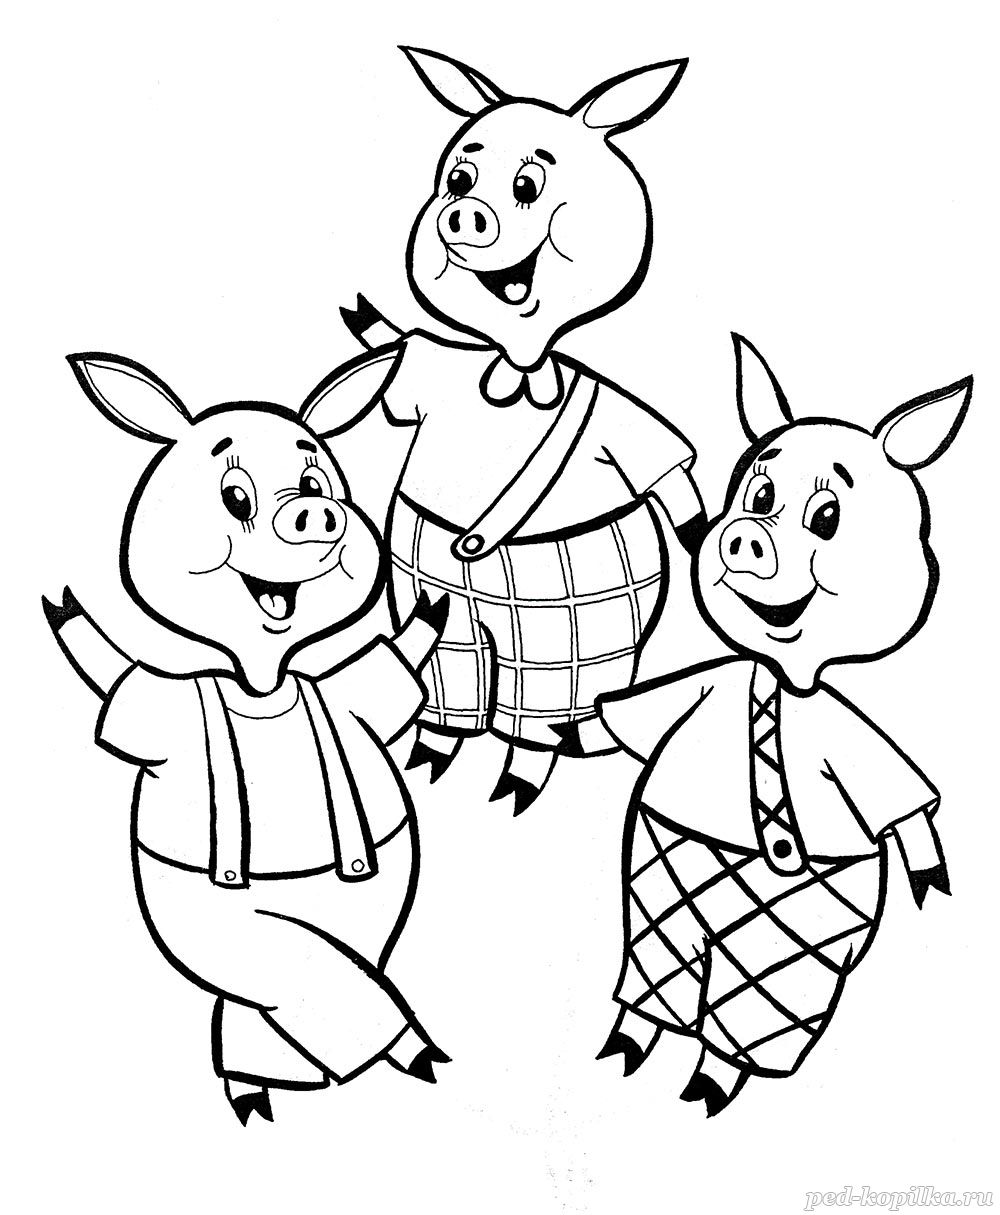 three-little-pigs-coloring-pages-coloring-pages-to-download-and-print